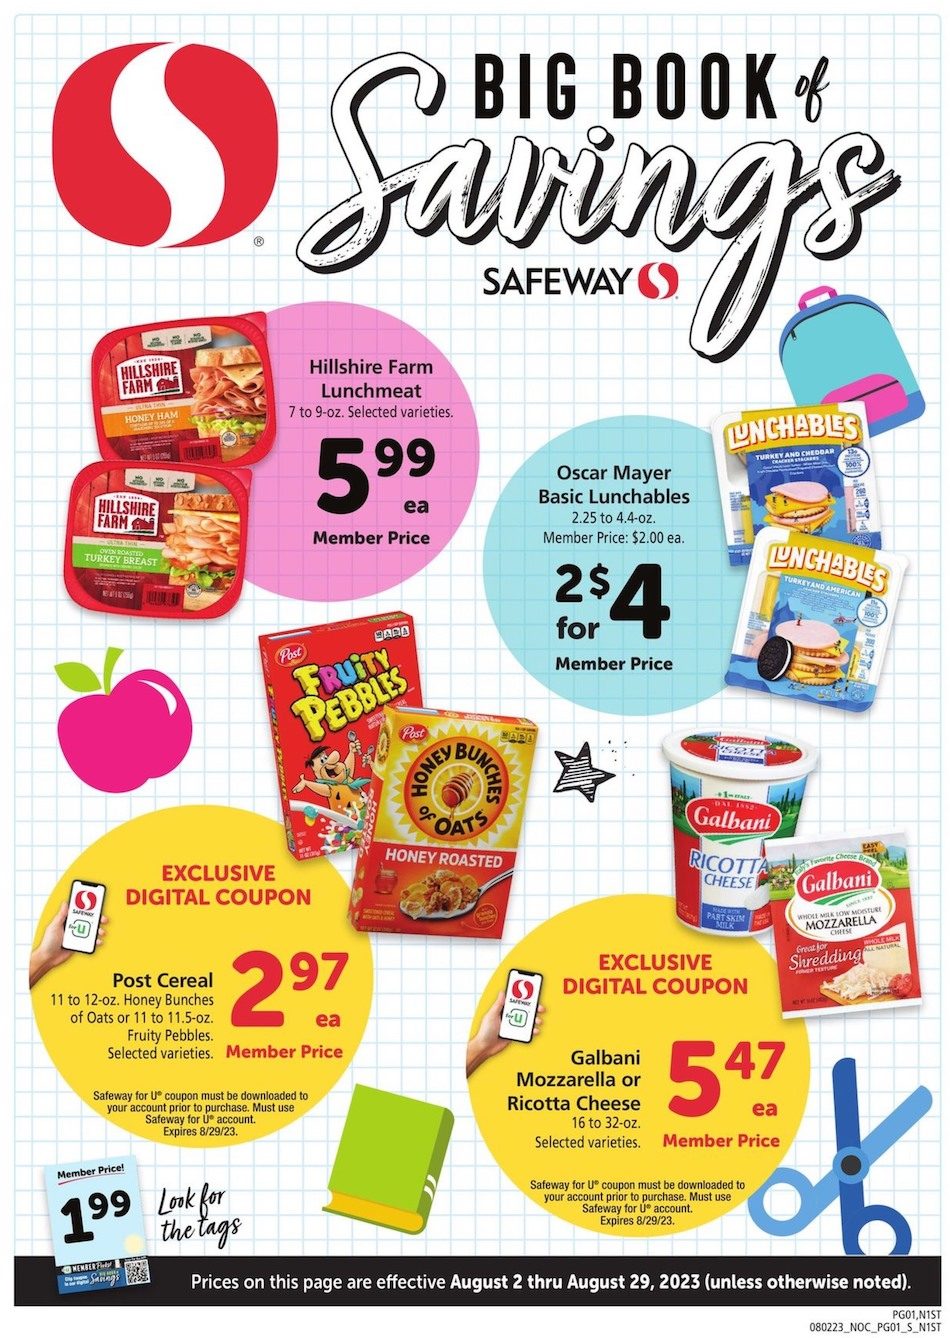 Safeway Ad Big Book Savings 2nd – 29th August 2023 Page 1